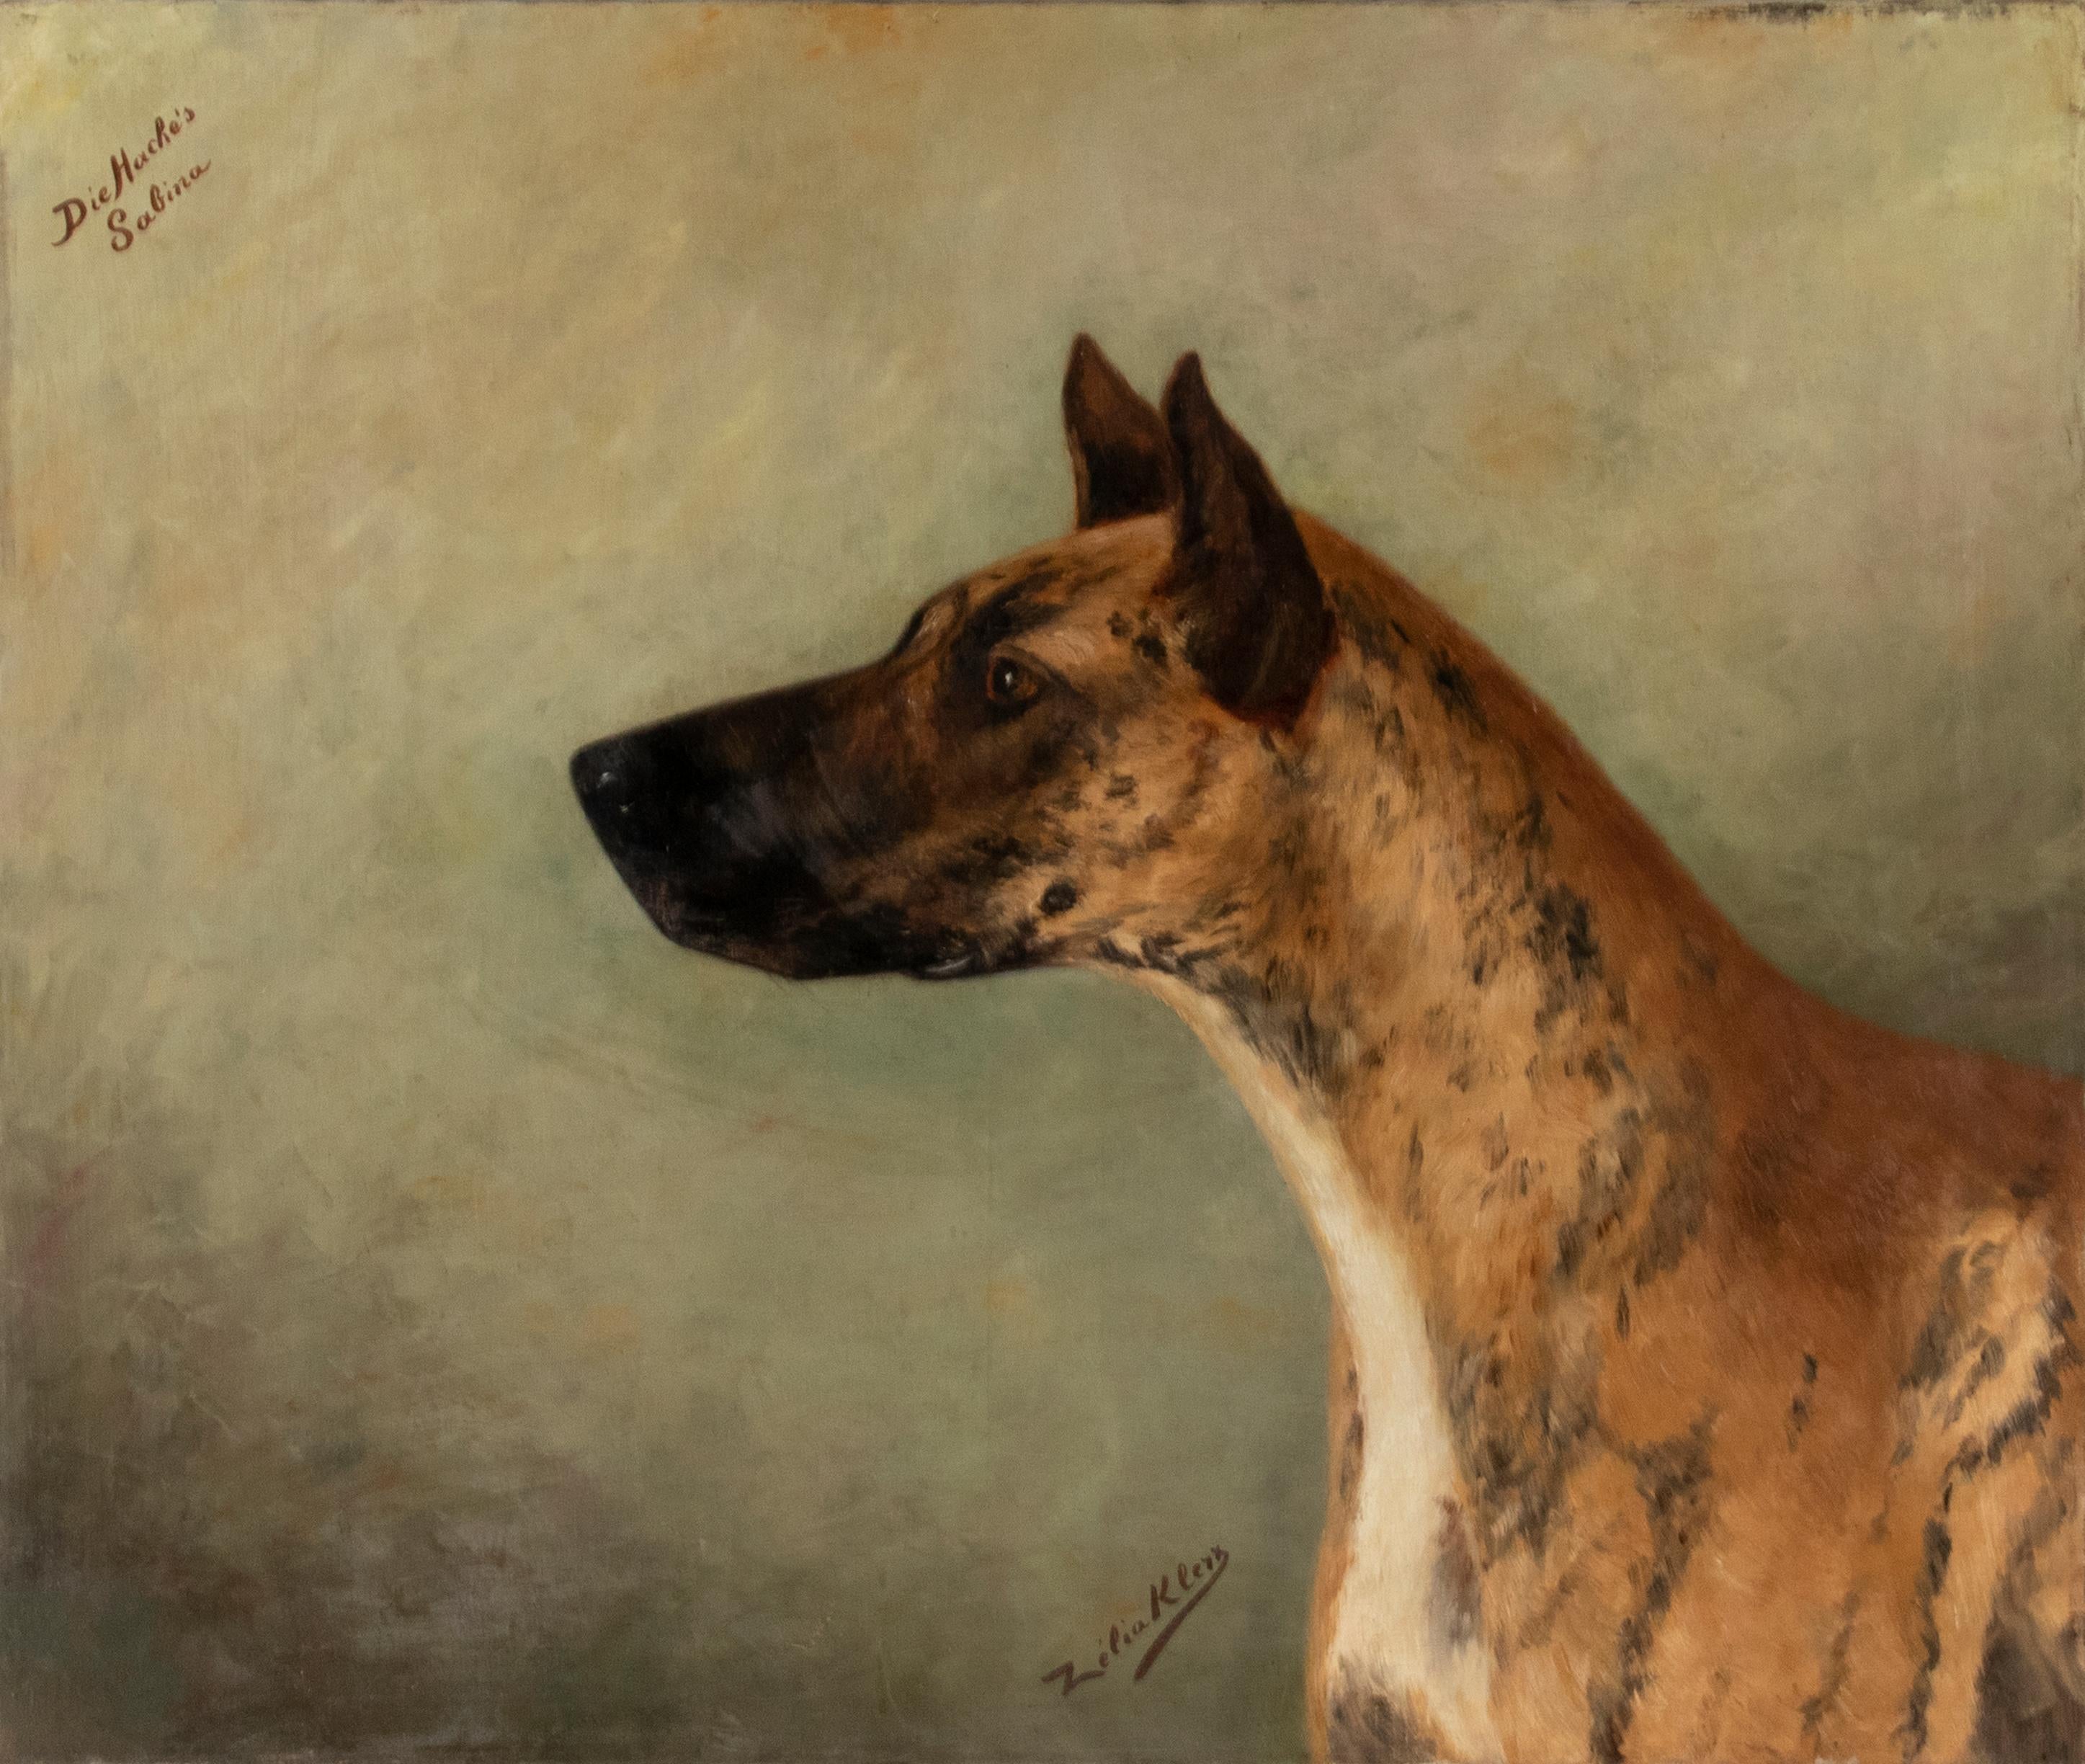 Beautiful antique painting, it is a dog portrait of a Great Dane. The painting is signed Zélia Klerx, she was an artist from the Belgian region of the Ardennes, she made paintings commissioned by owners of castles and distinguished houses. She